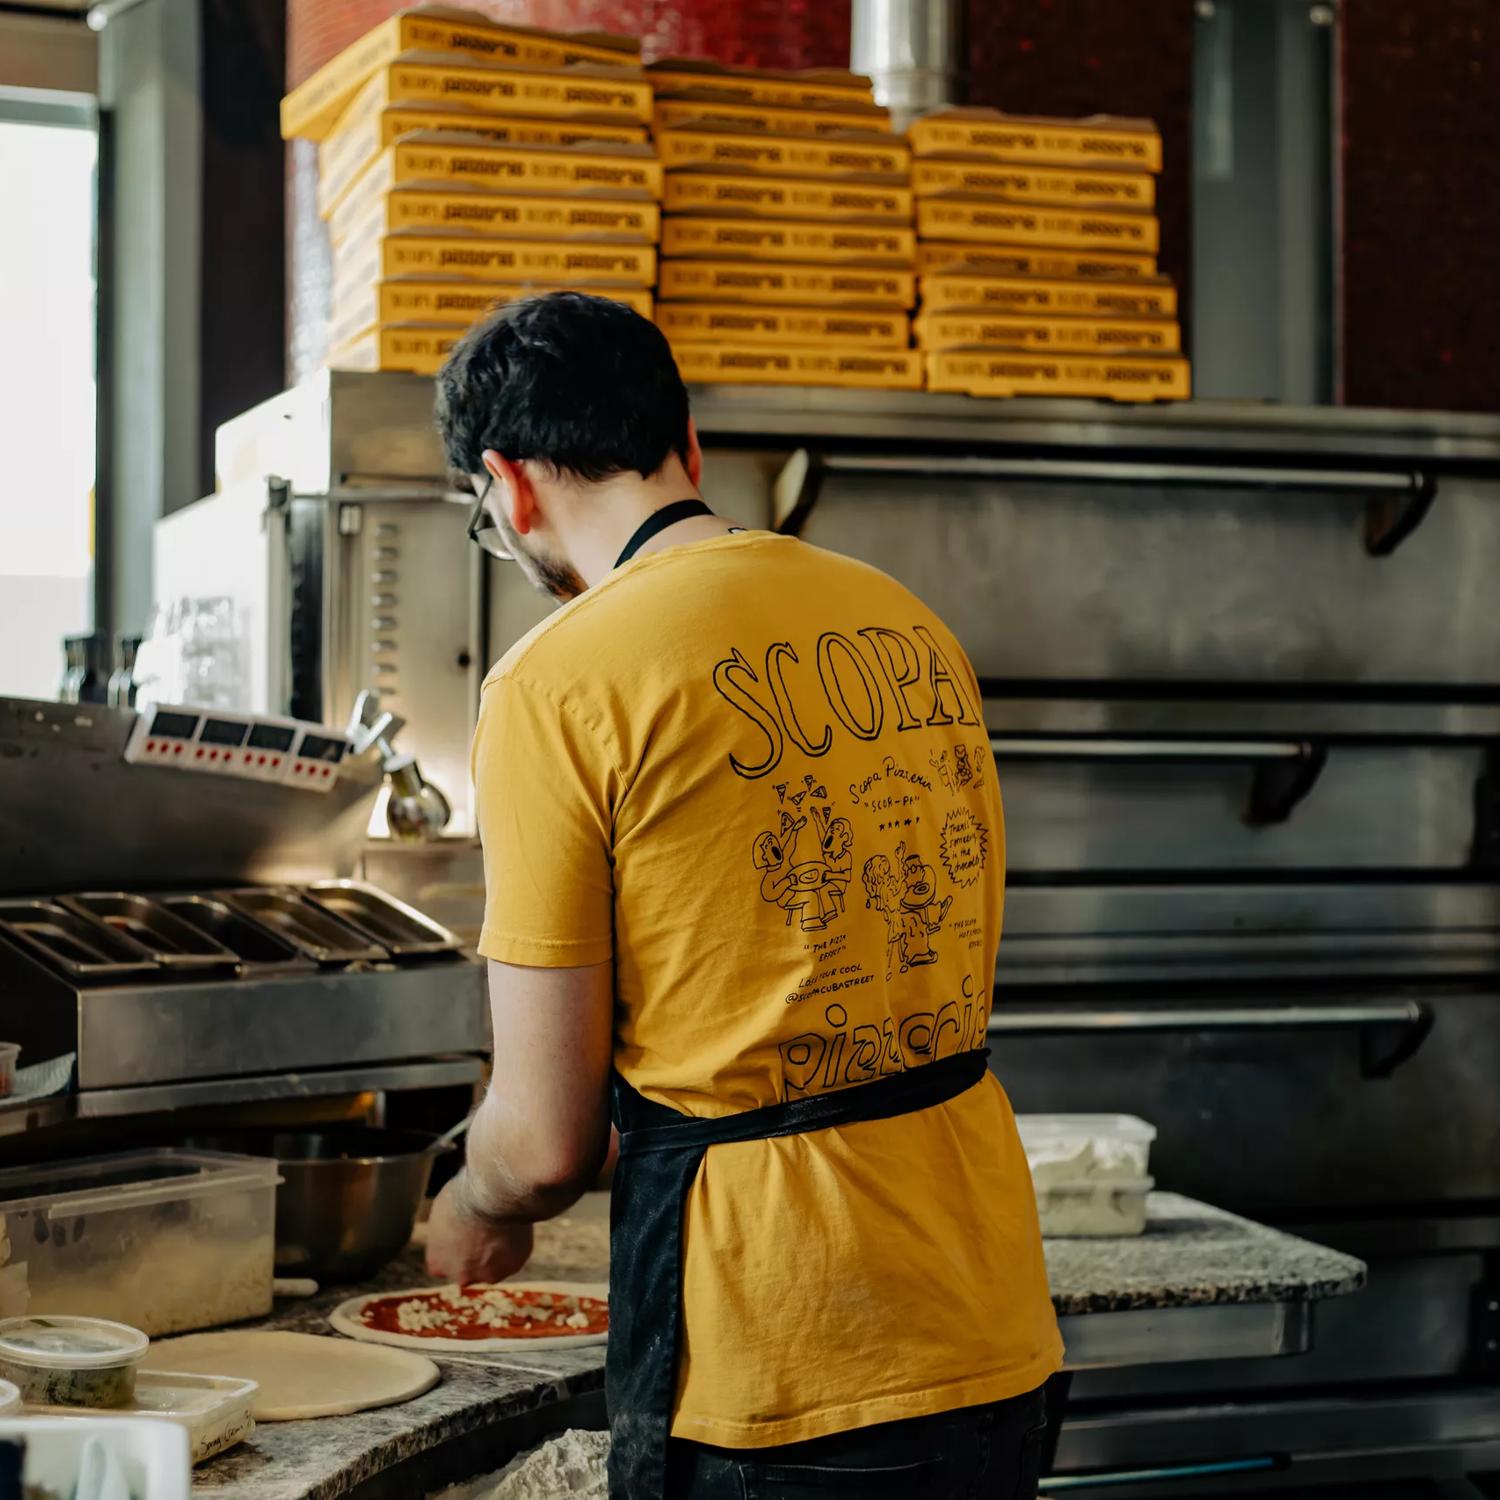 A chef from Scopa making pizzas with their back turned, wearing a yellow Scopa shirt.